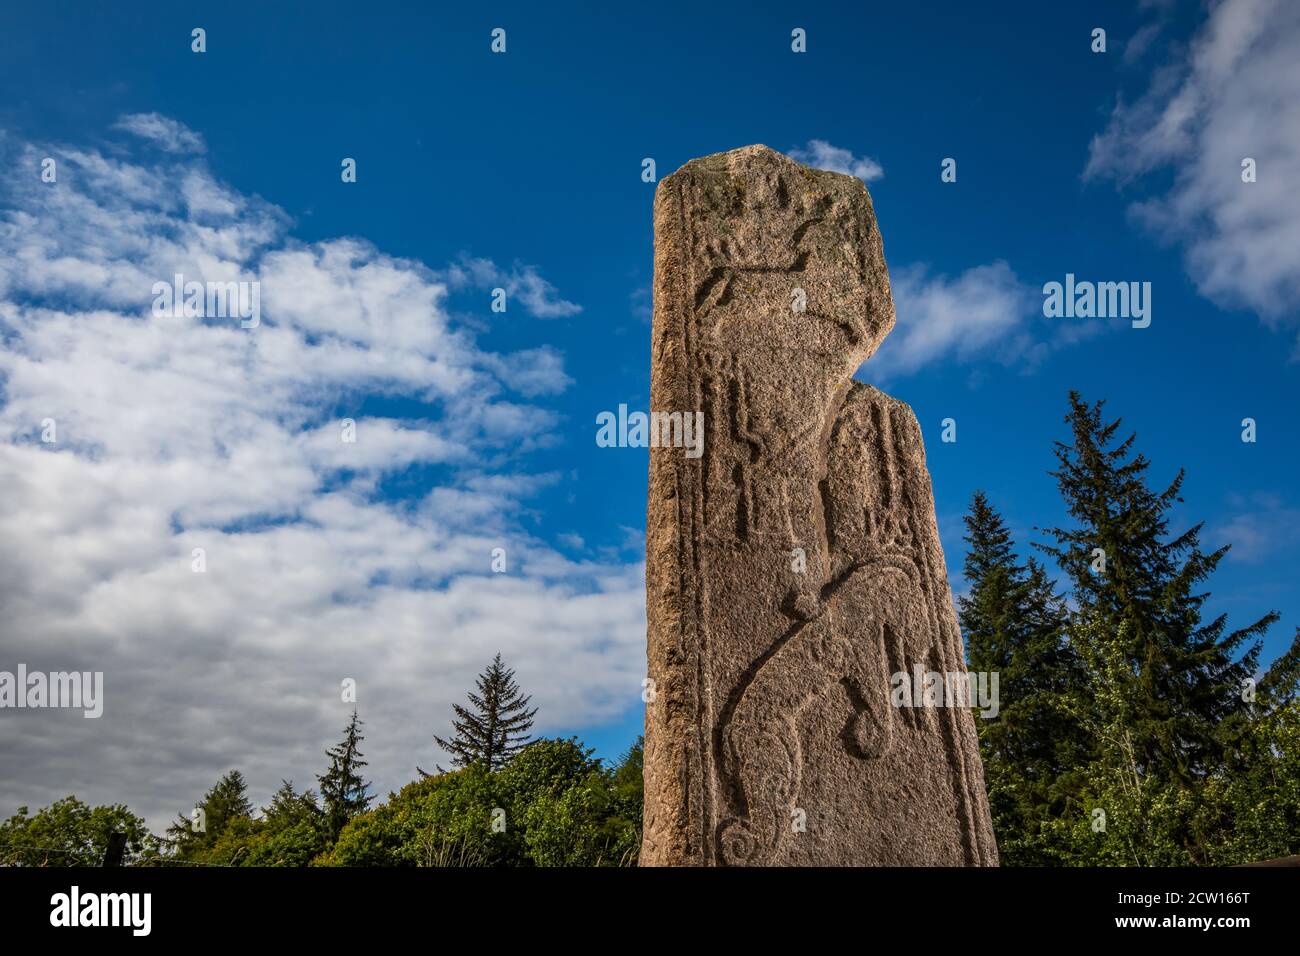 The Maiden Stone, an ancient standing Pictish symbol stone near Inverurie, Aberdeenshire, Scotland, UK Stock Photo